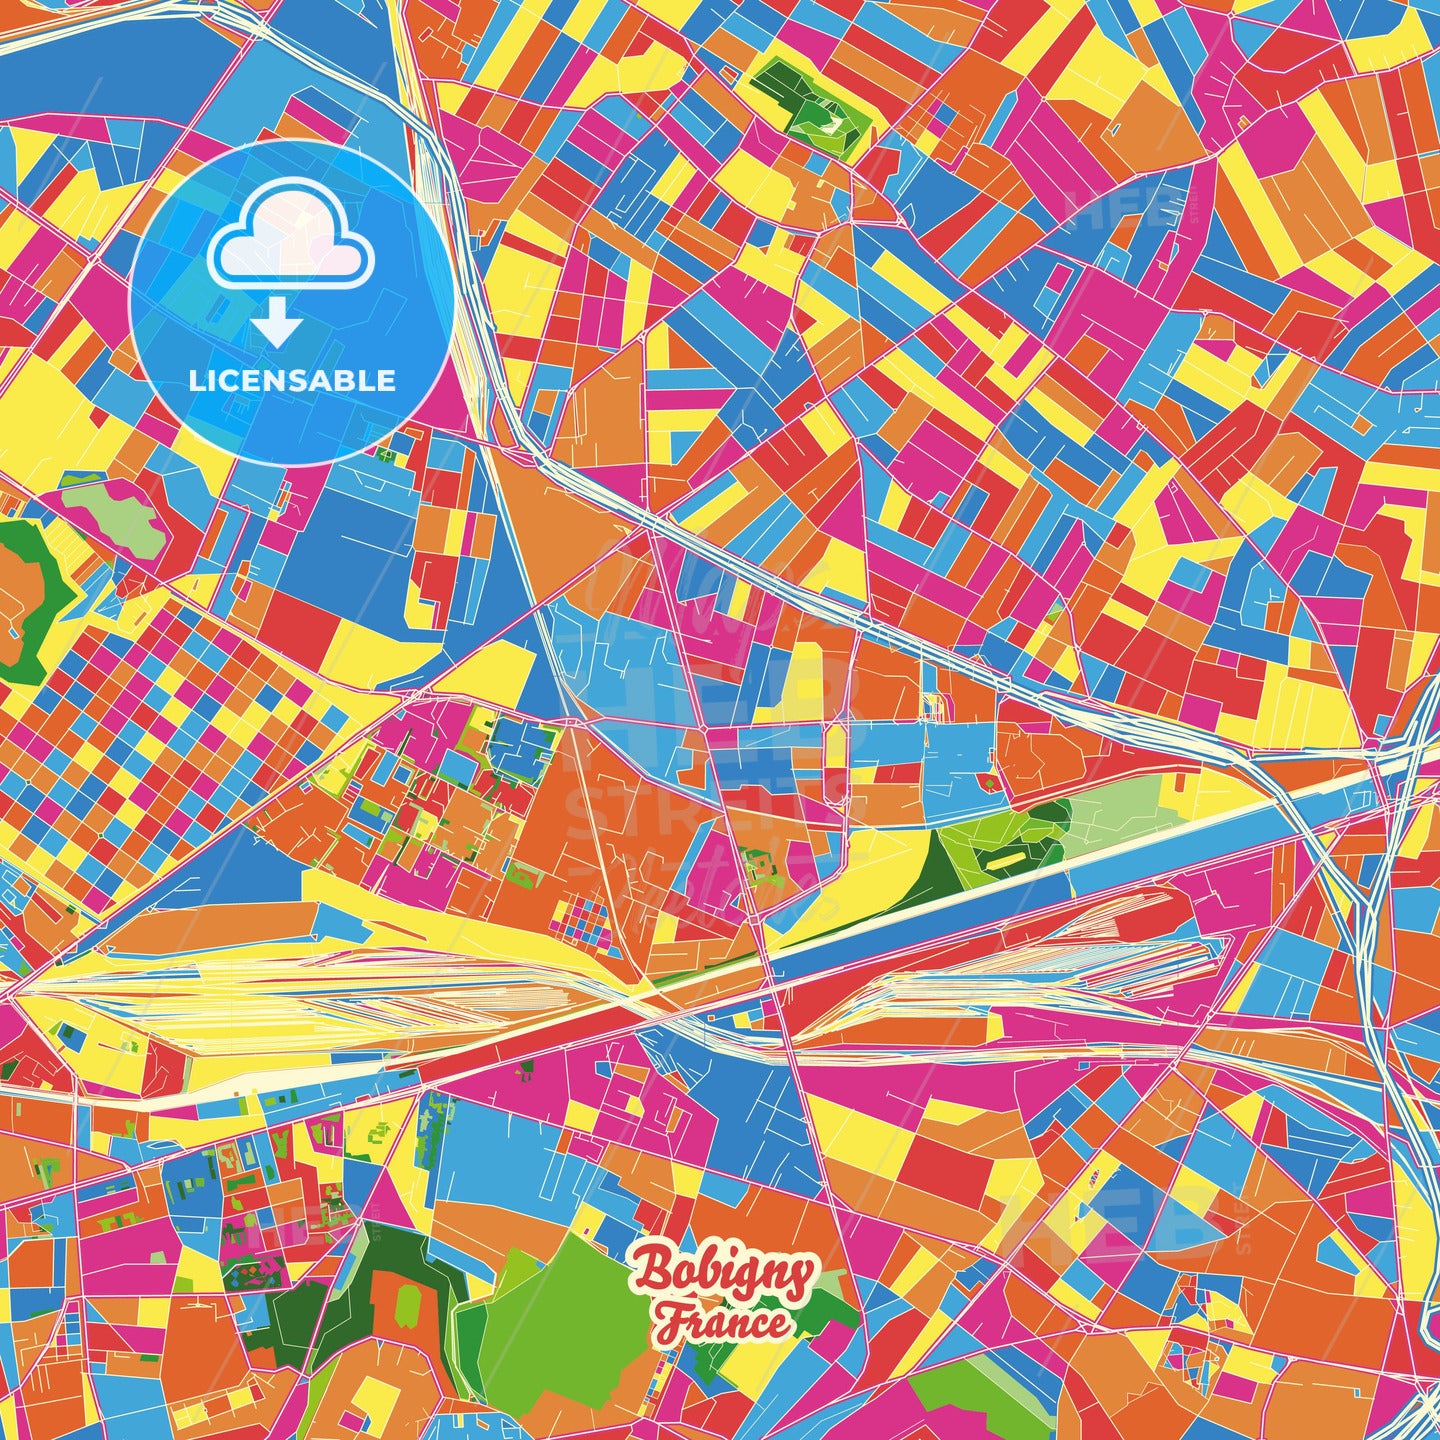 Bobigny, France Crazy Colorful Street Map Poster Template - HEBSTREITS Sketches